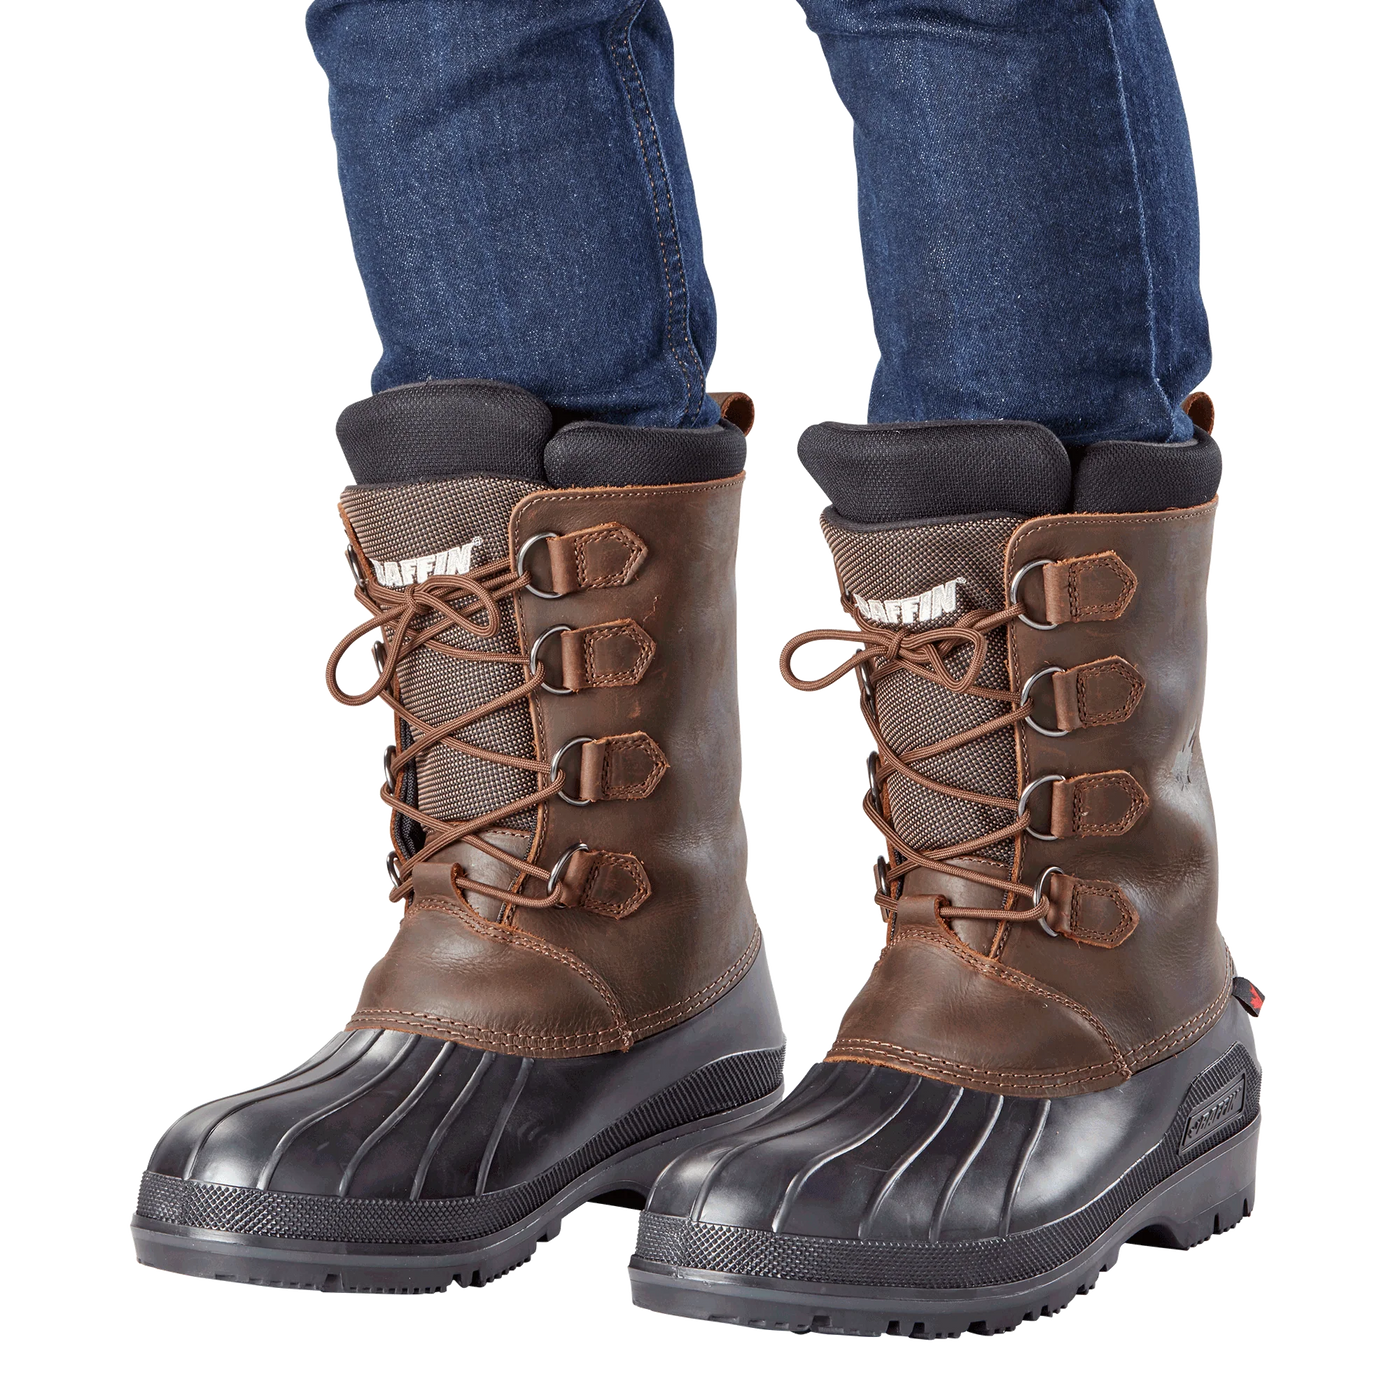 CAMBRIAN, men's winter boots (±-60°C) - Baffin